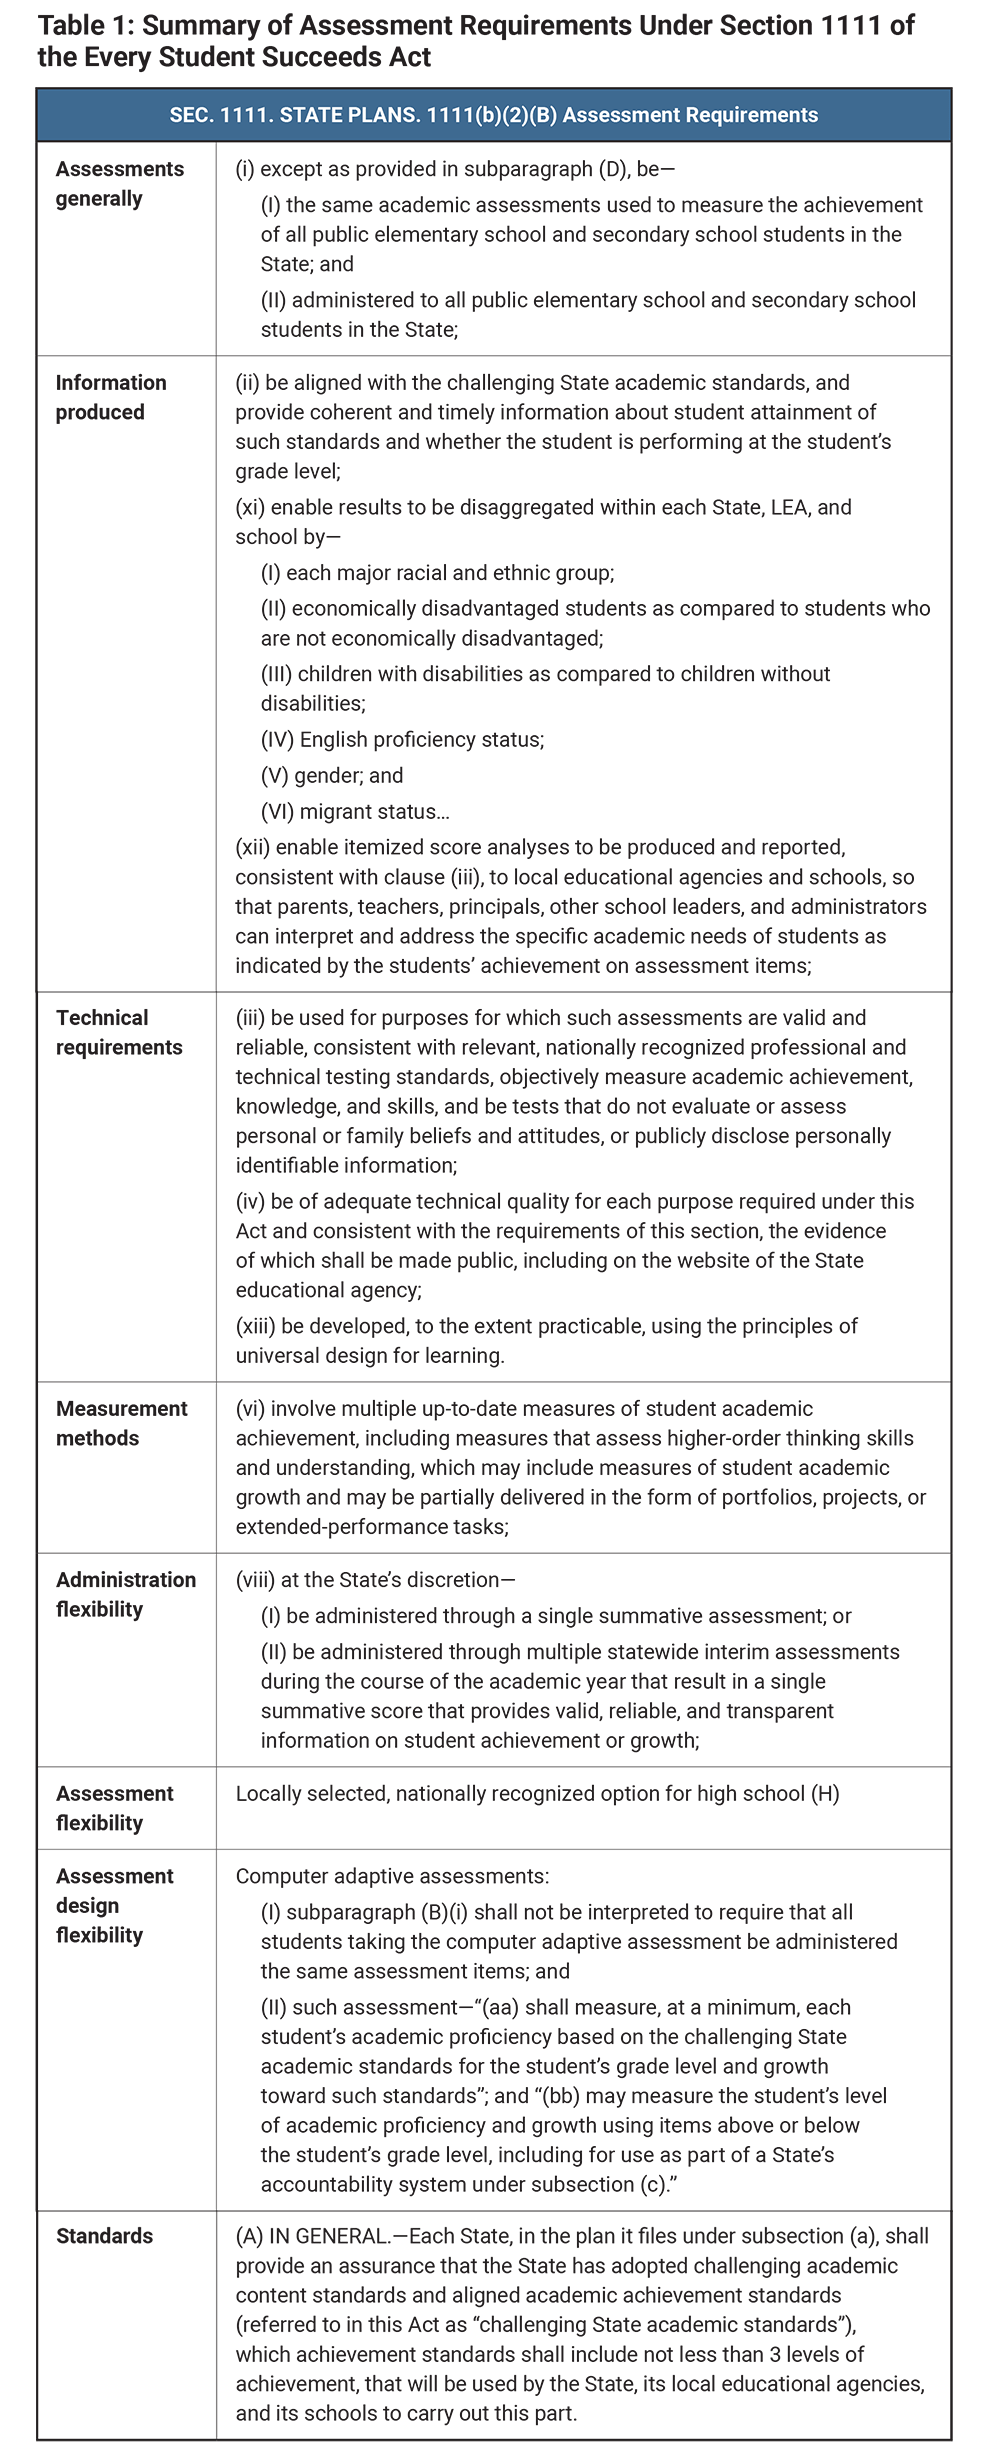 Table 1: Summary of Assessment Requirements Under Section 1111 of the Every Student Succeeds Act